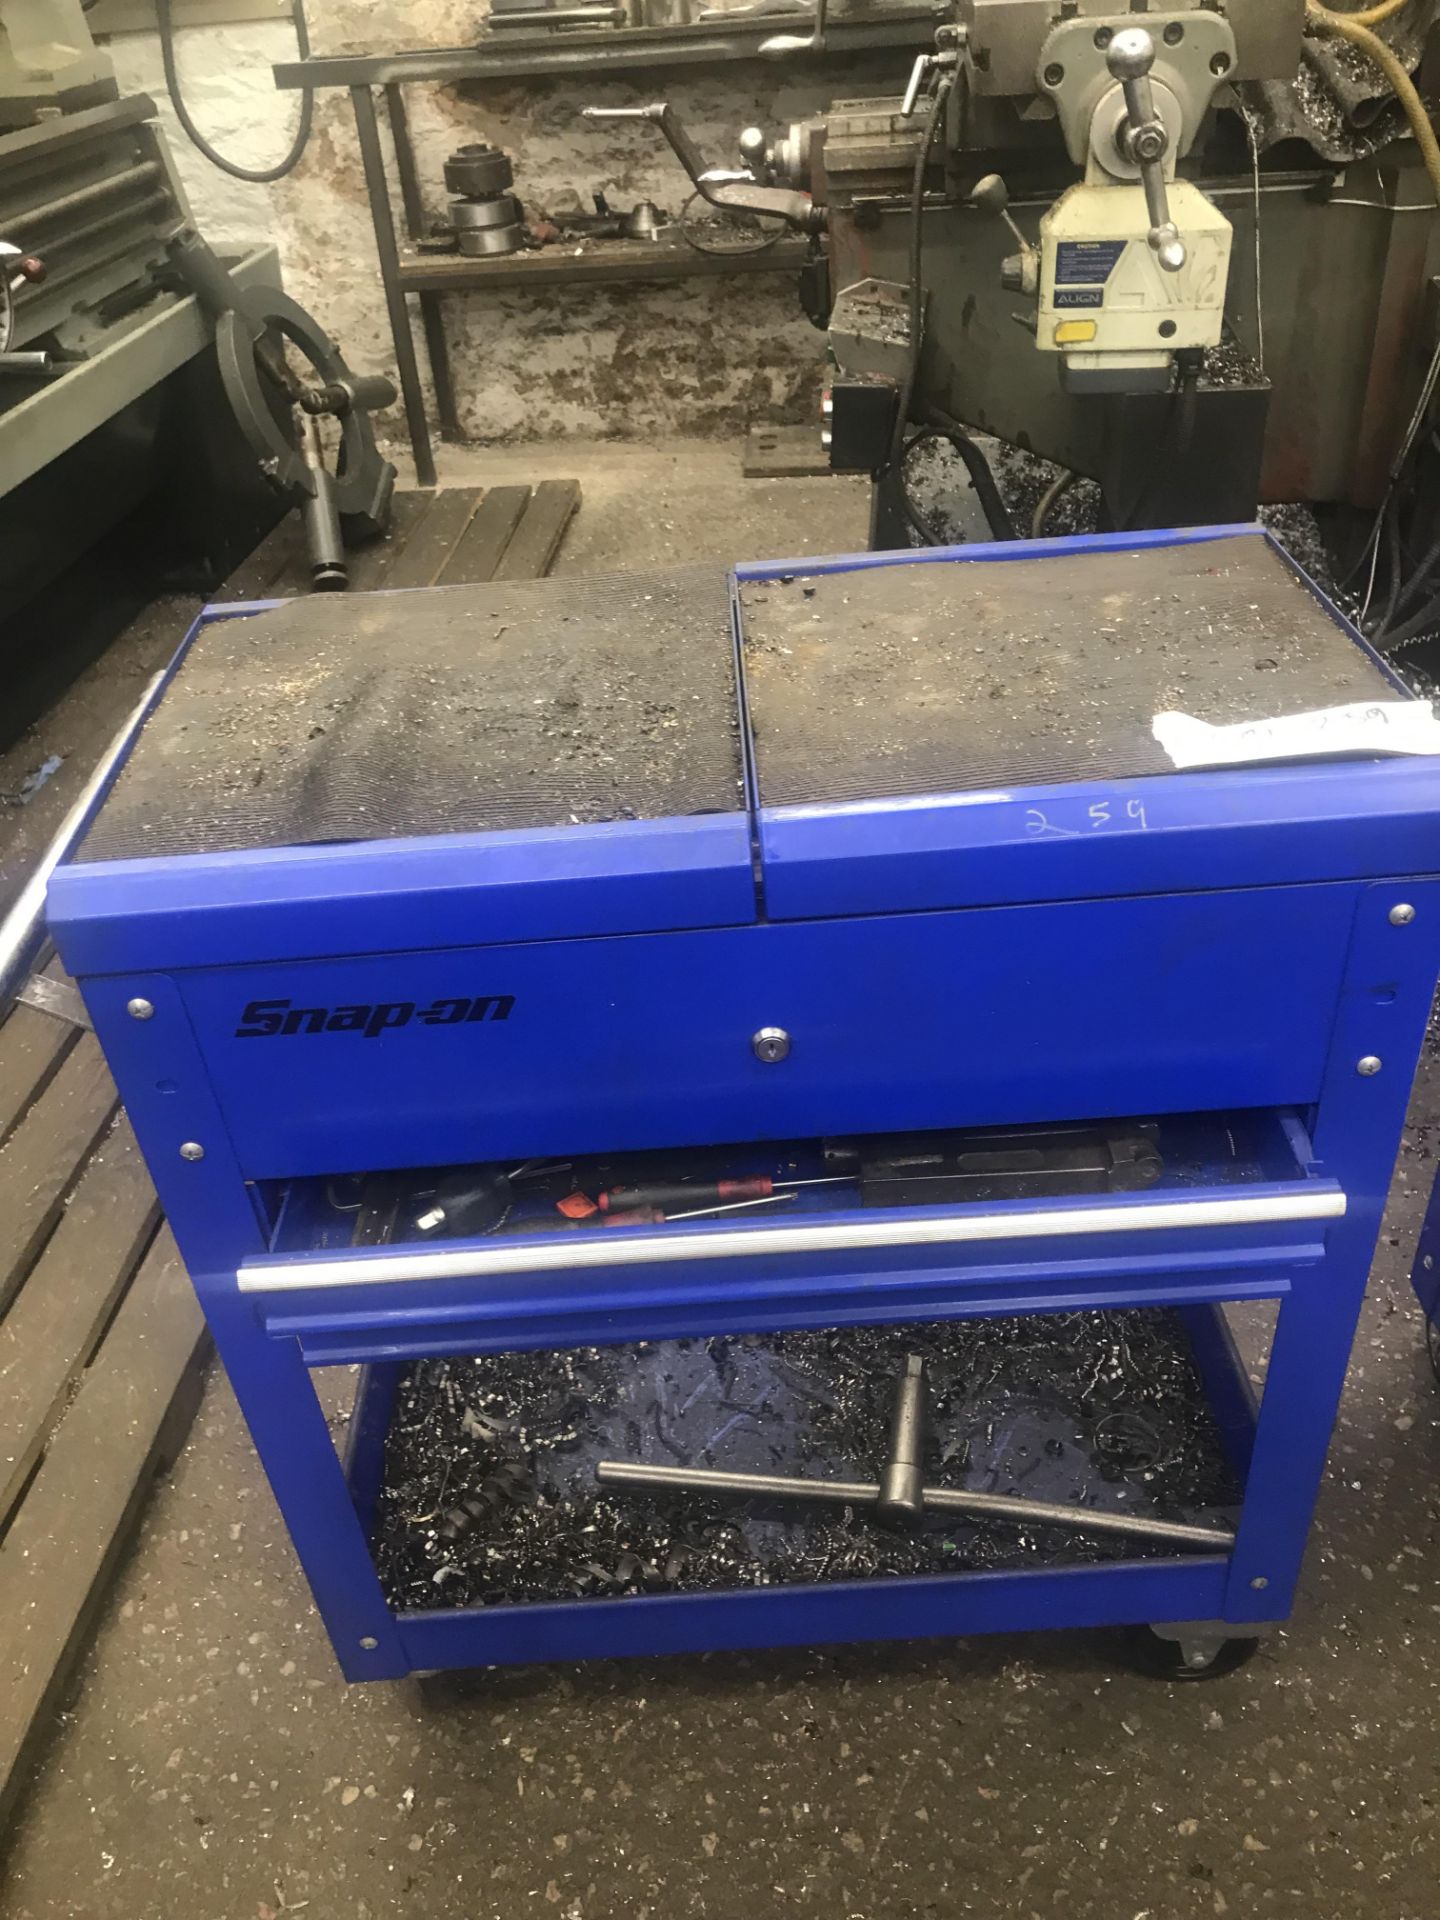 Snap-on PORTABLE TOOL CHEST On left)